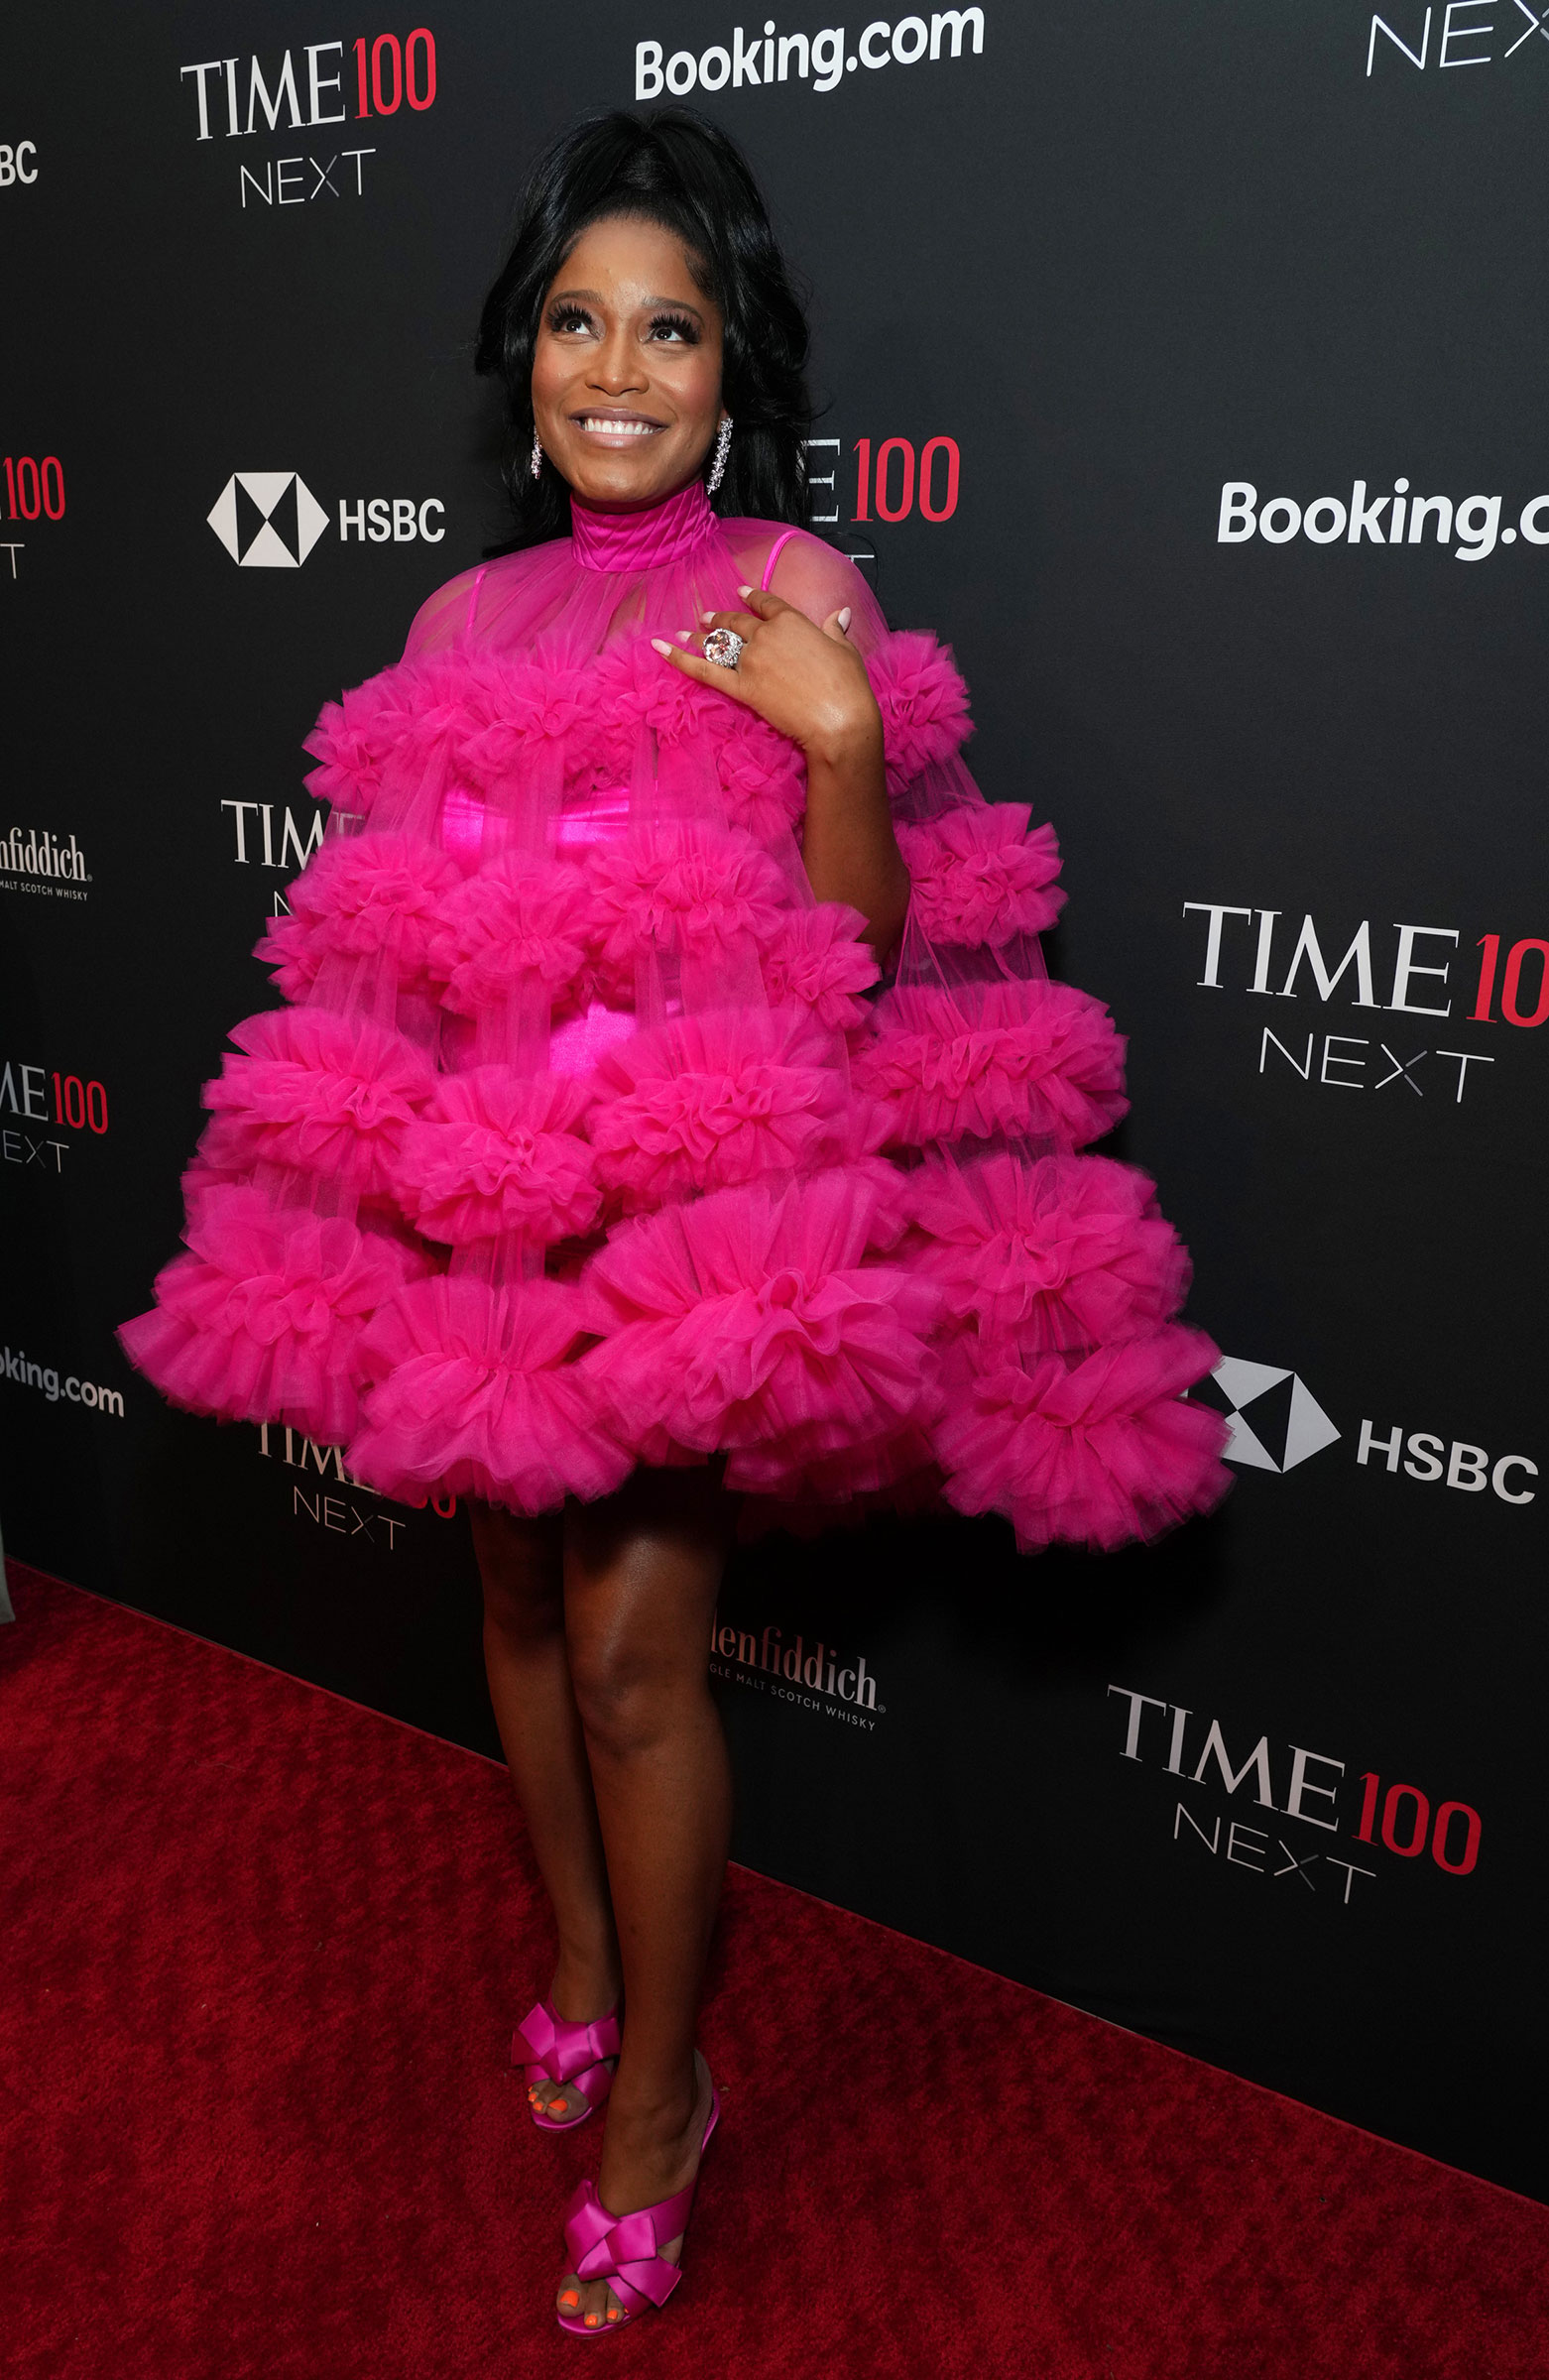 Actor Keke Palmer, and TIME100 next host, attends the TIME100 Next Gala in New York City on Oct. 25, 2022. (Kevin Mazur—Getty Images for TIME)